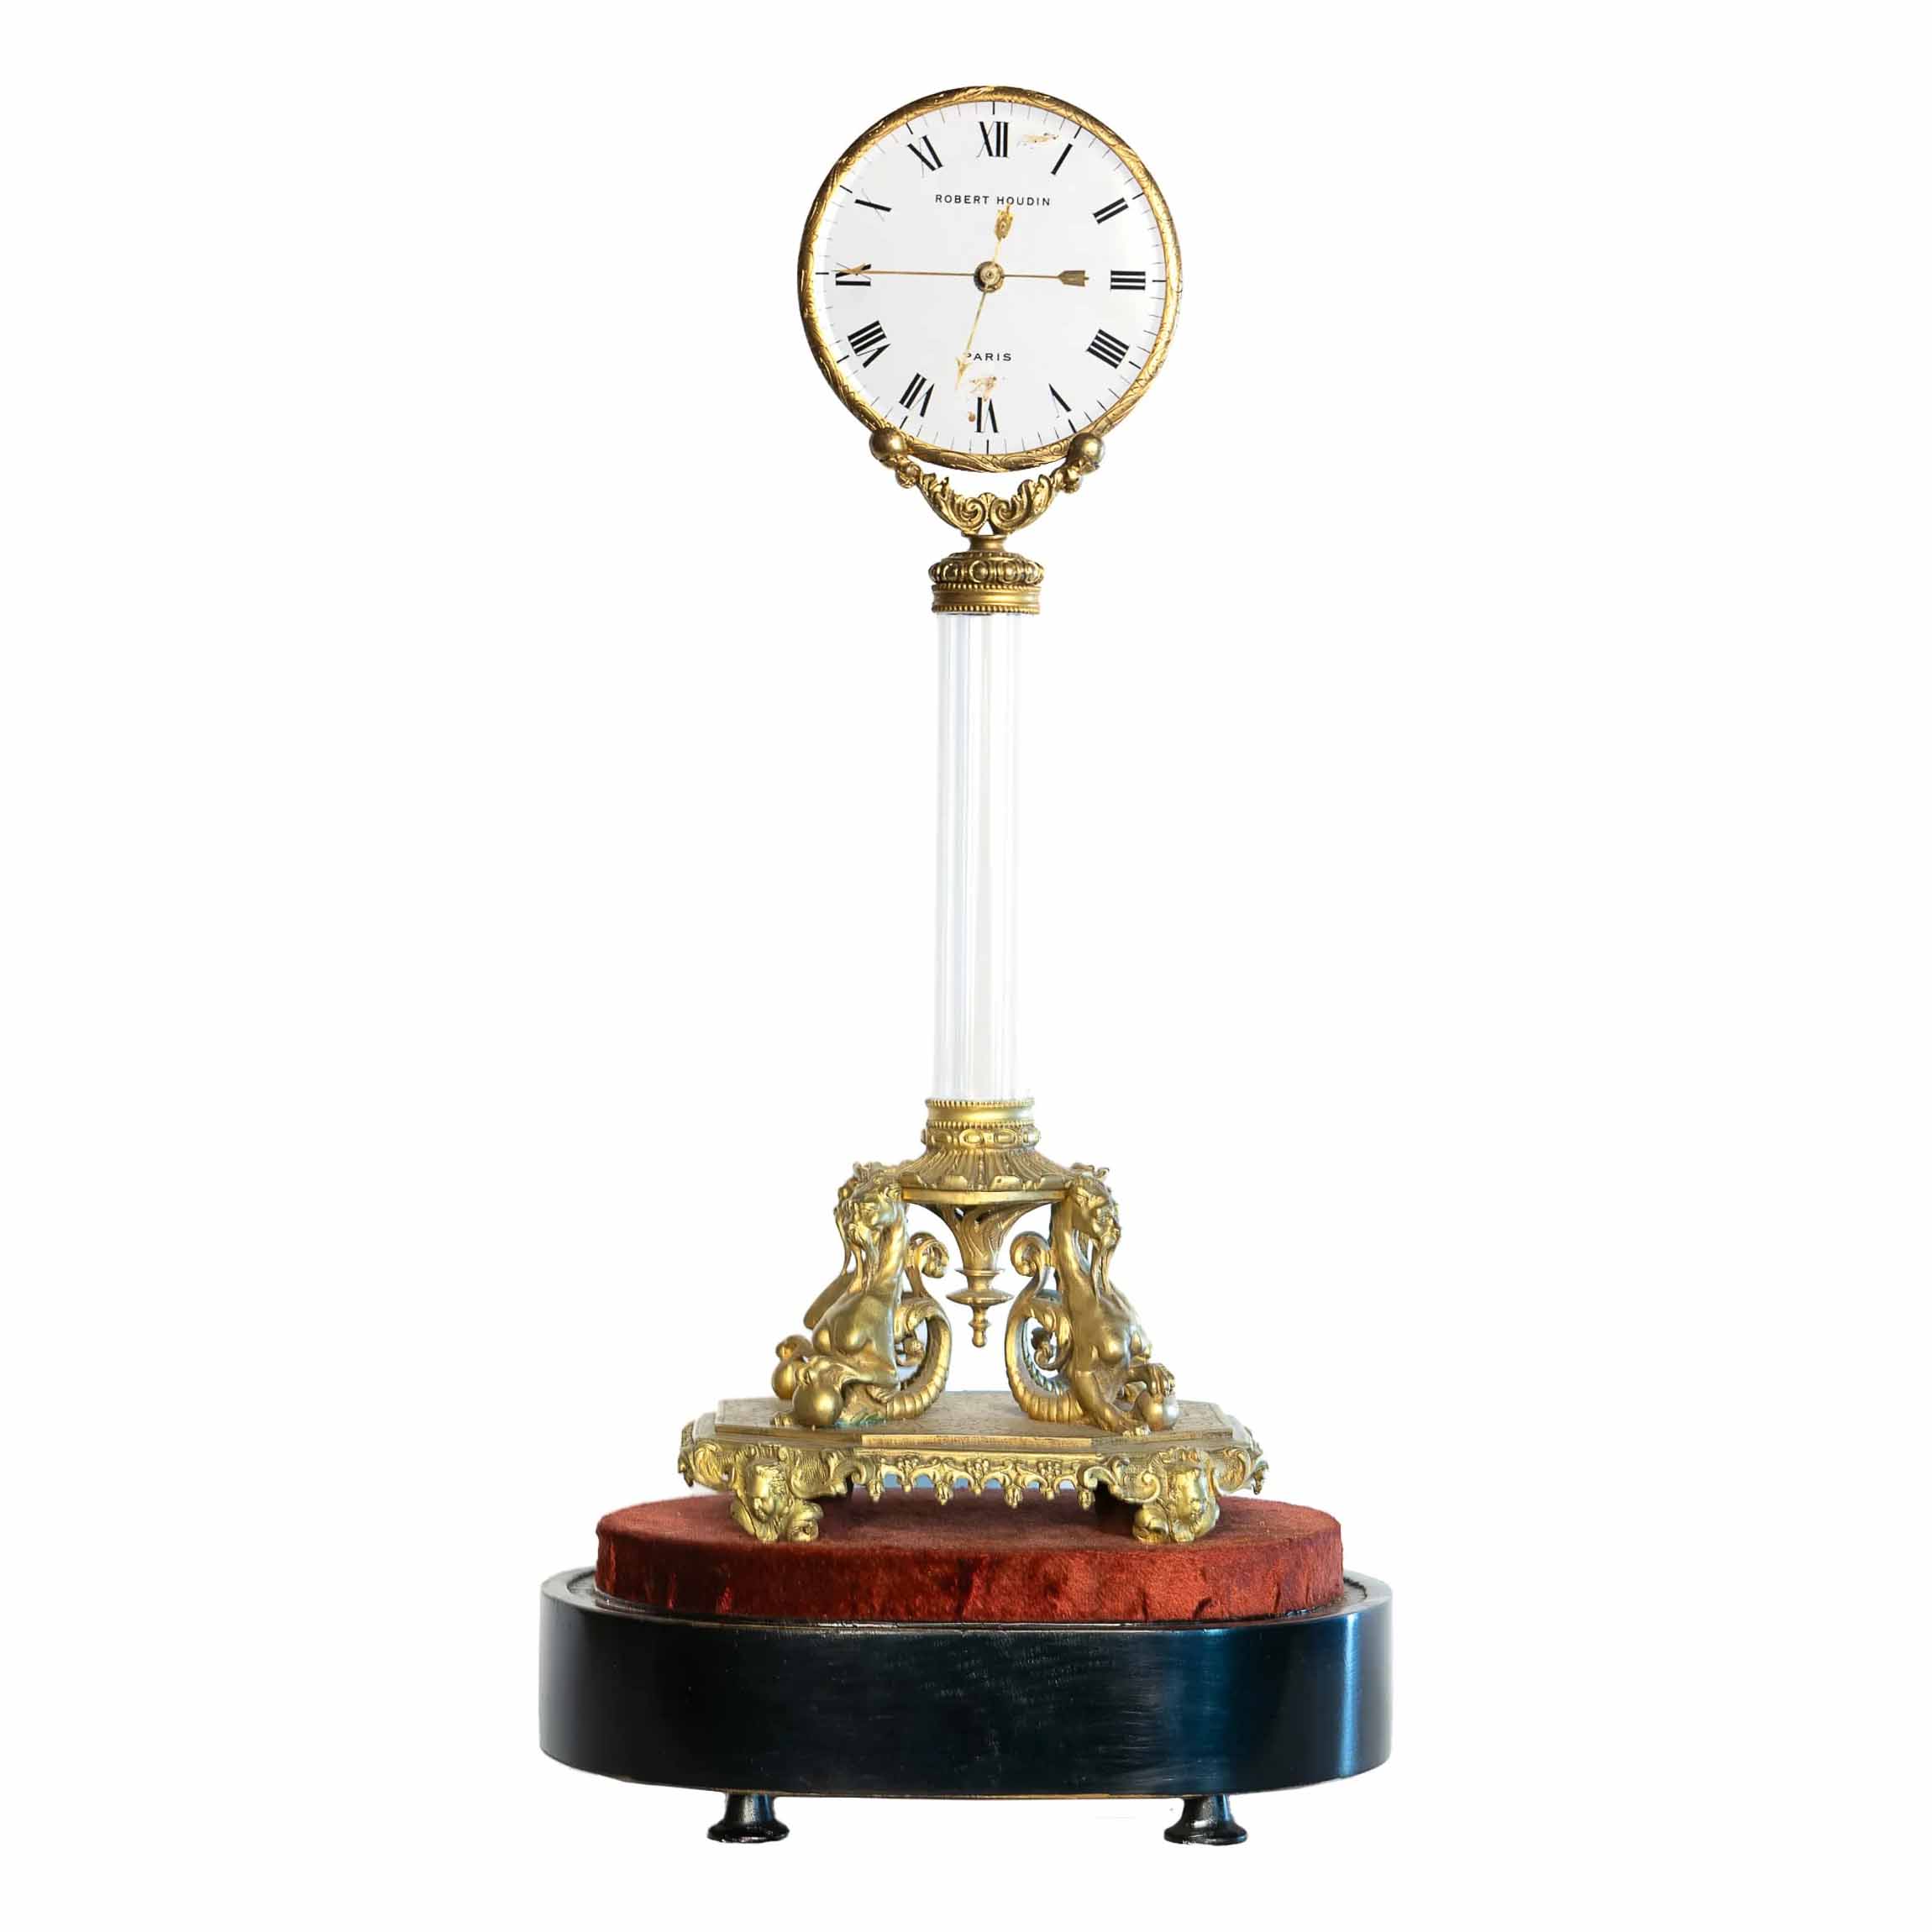 Six mystery clocks, one of each type Robert-Houdin made, appear together at Potter &#038; Potter June 8